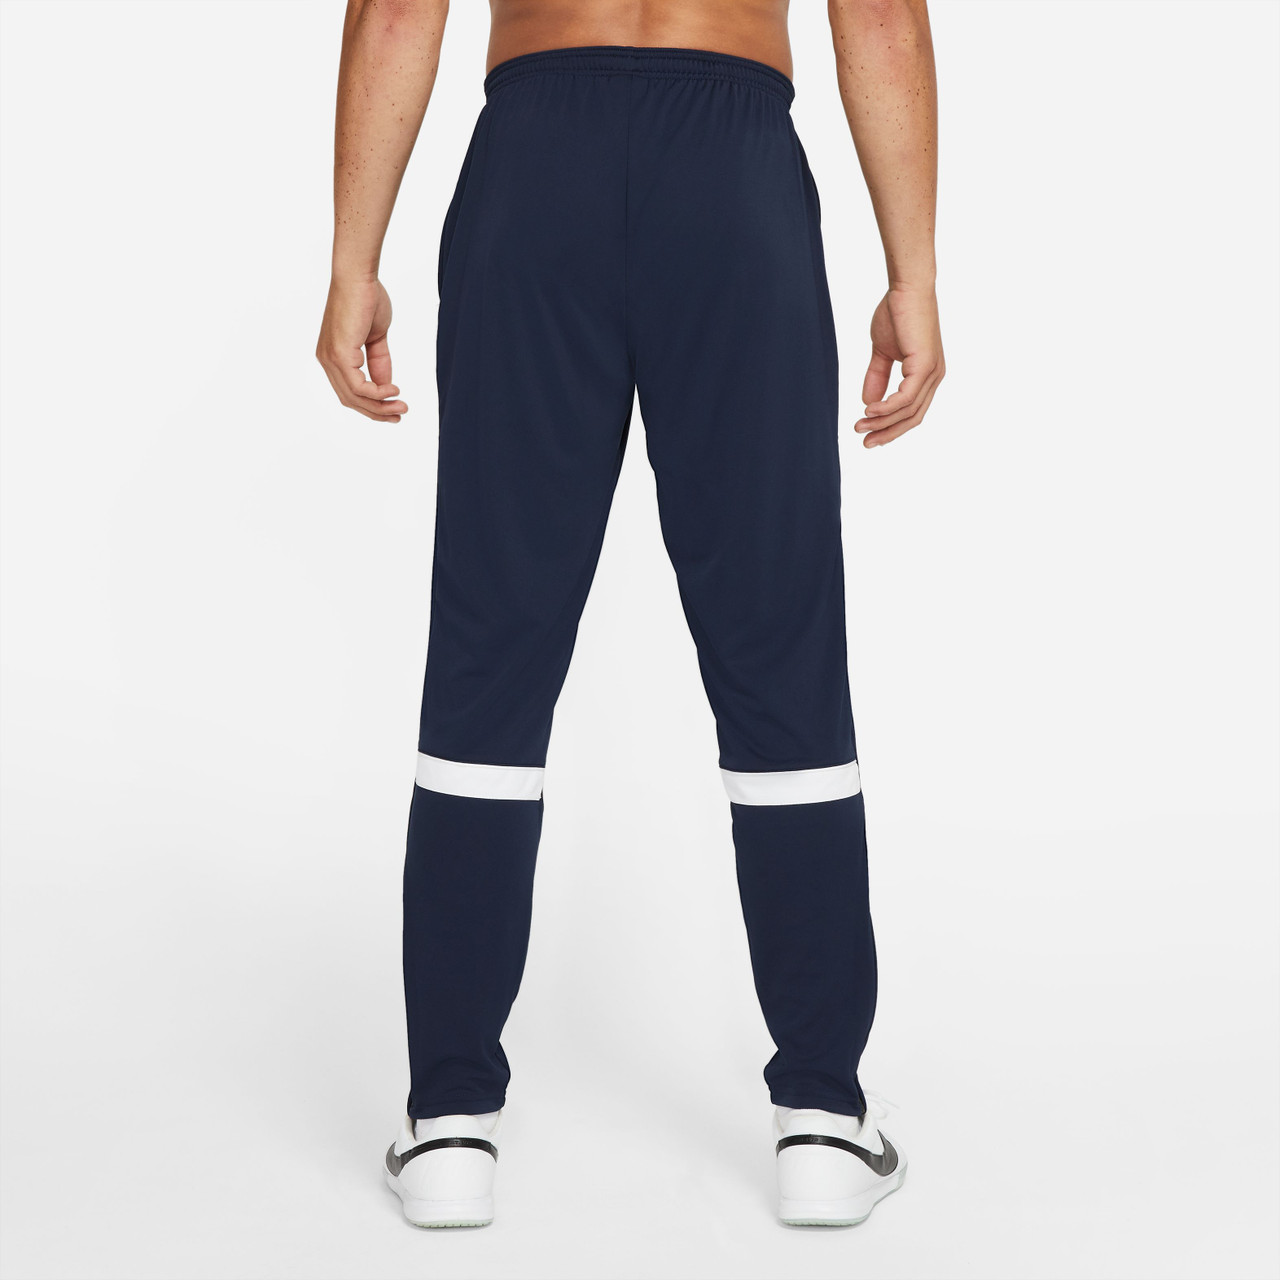 Nike Dri-FIT Academy Soccer Pants 451/Blue - Chicago Soccer